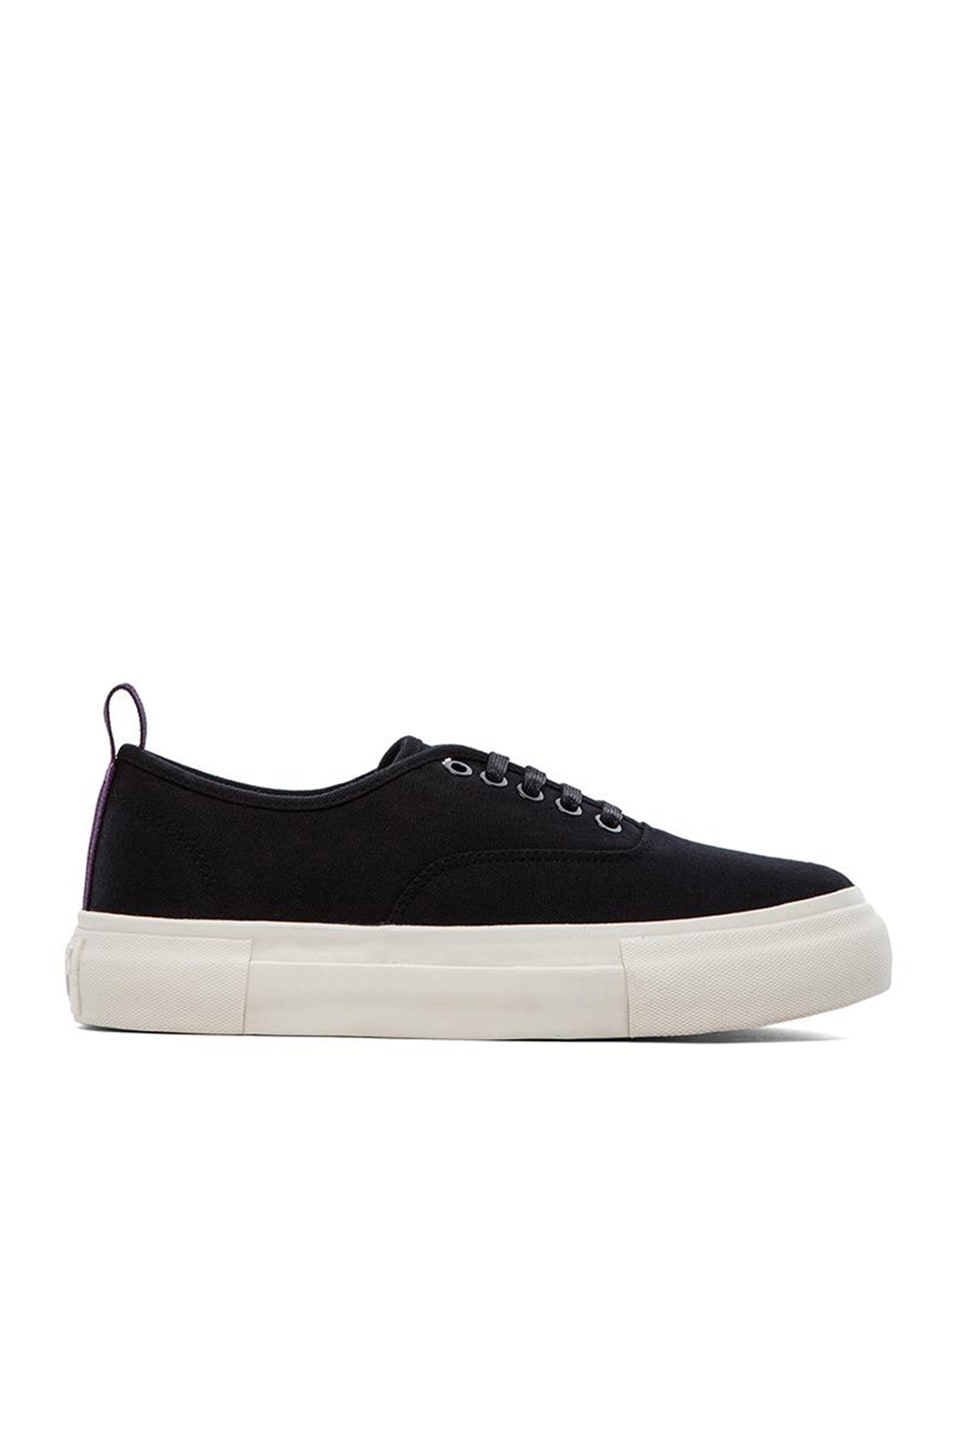 Eytys Mother Canvas in Black | REVOLVE